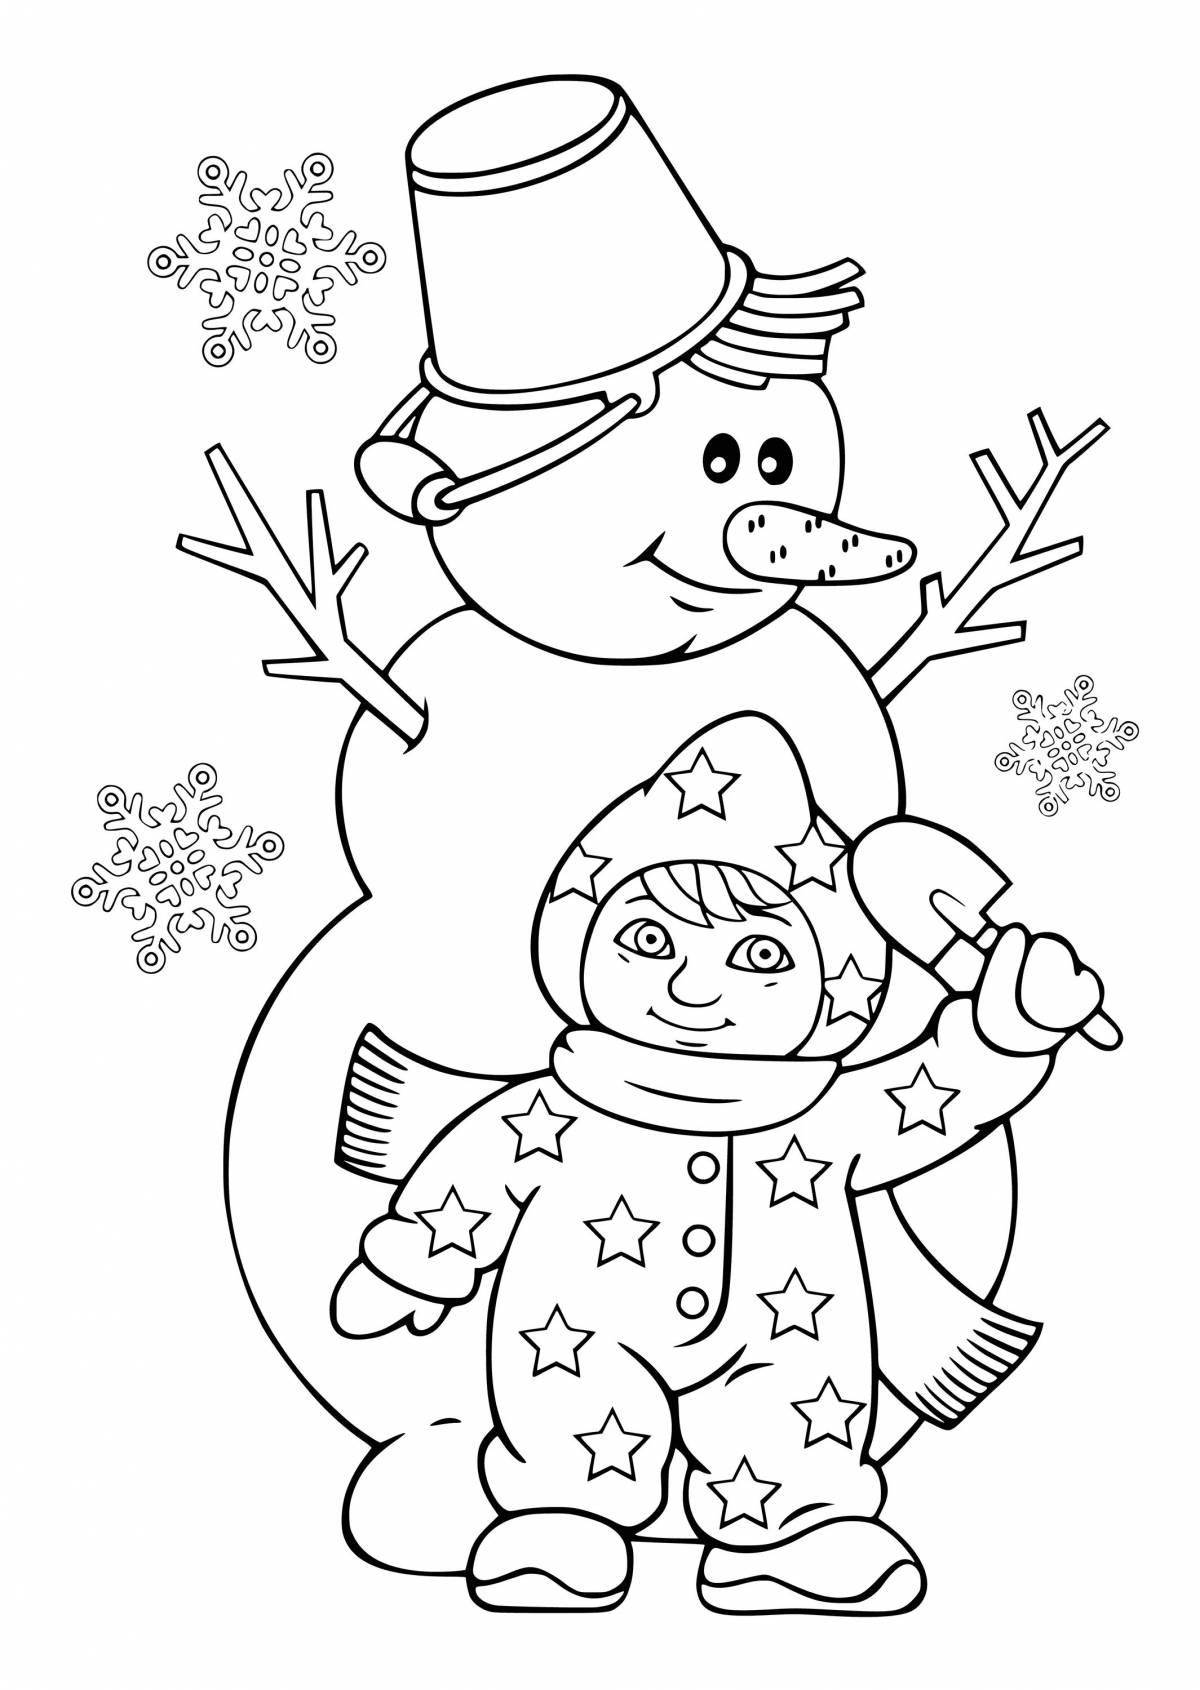 Colorful snowman coloring by numbers